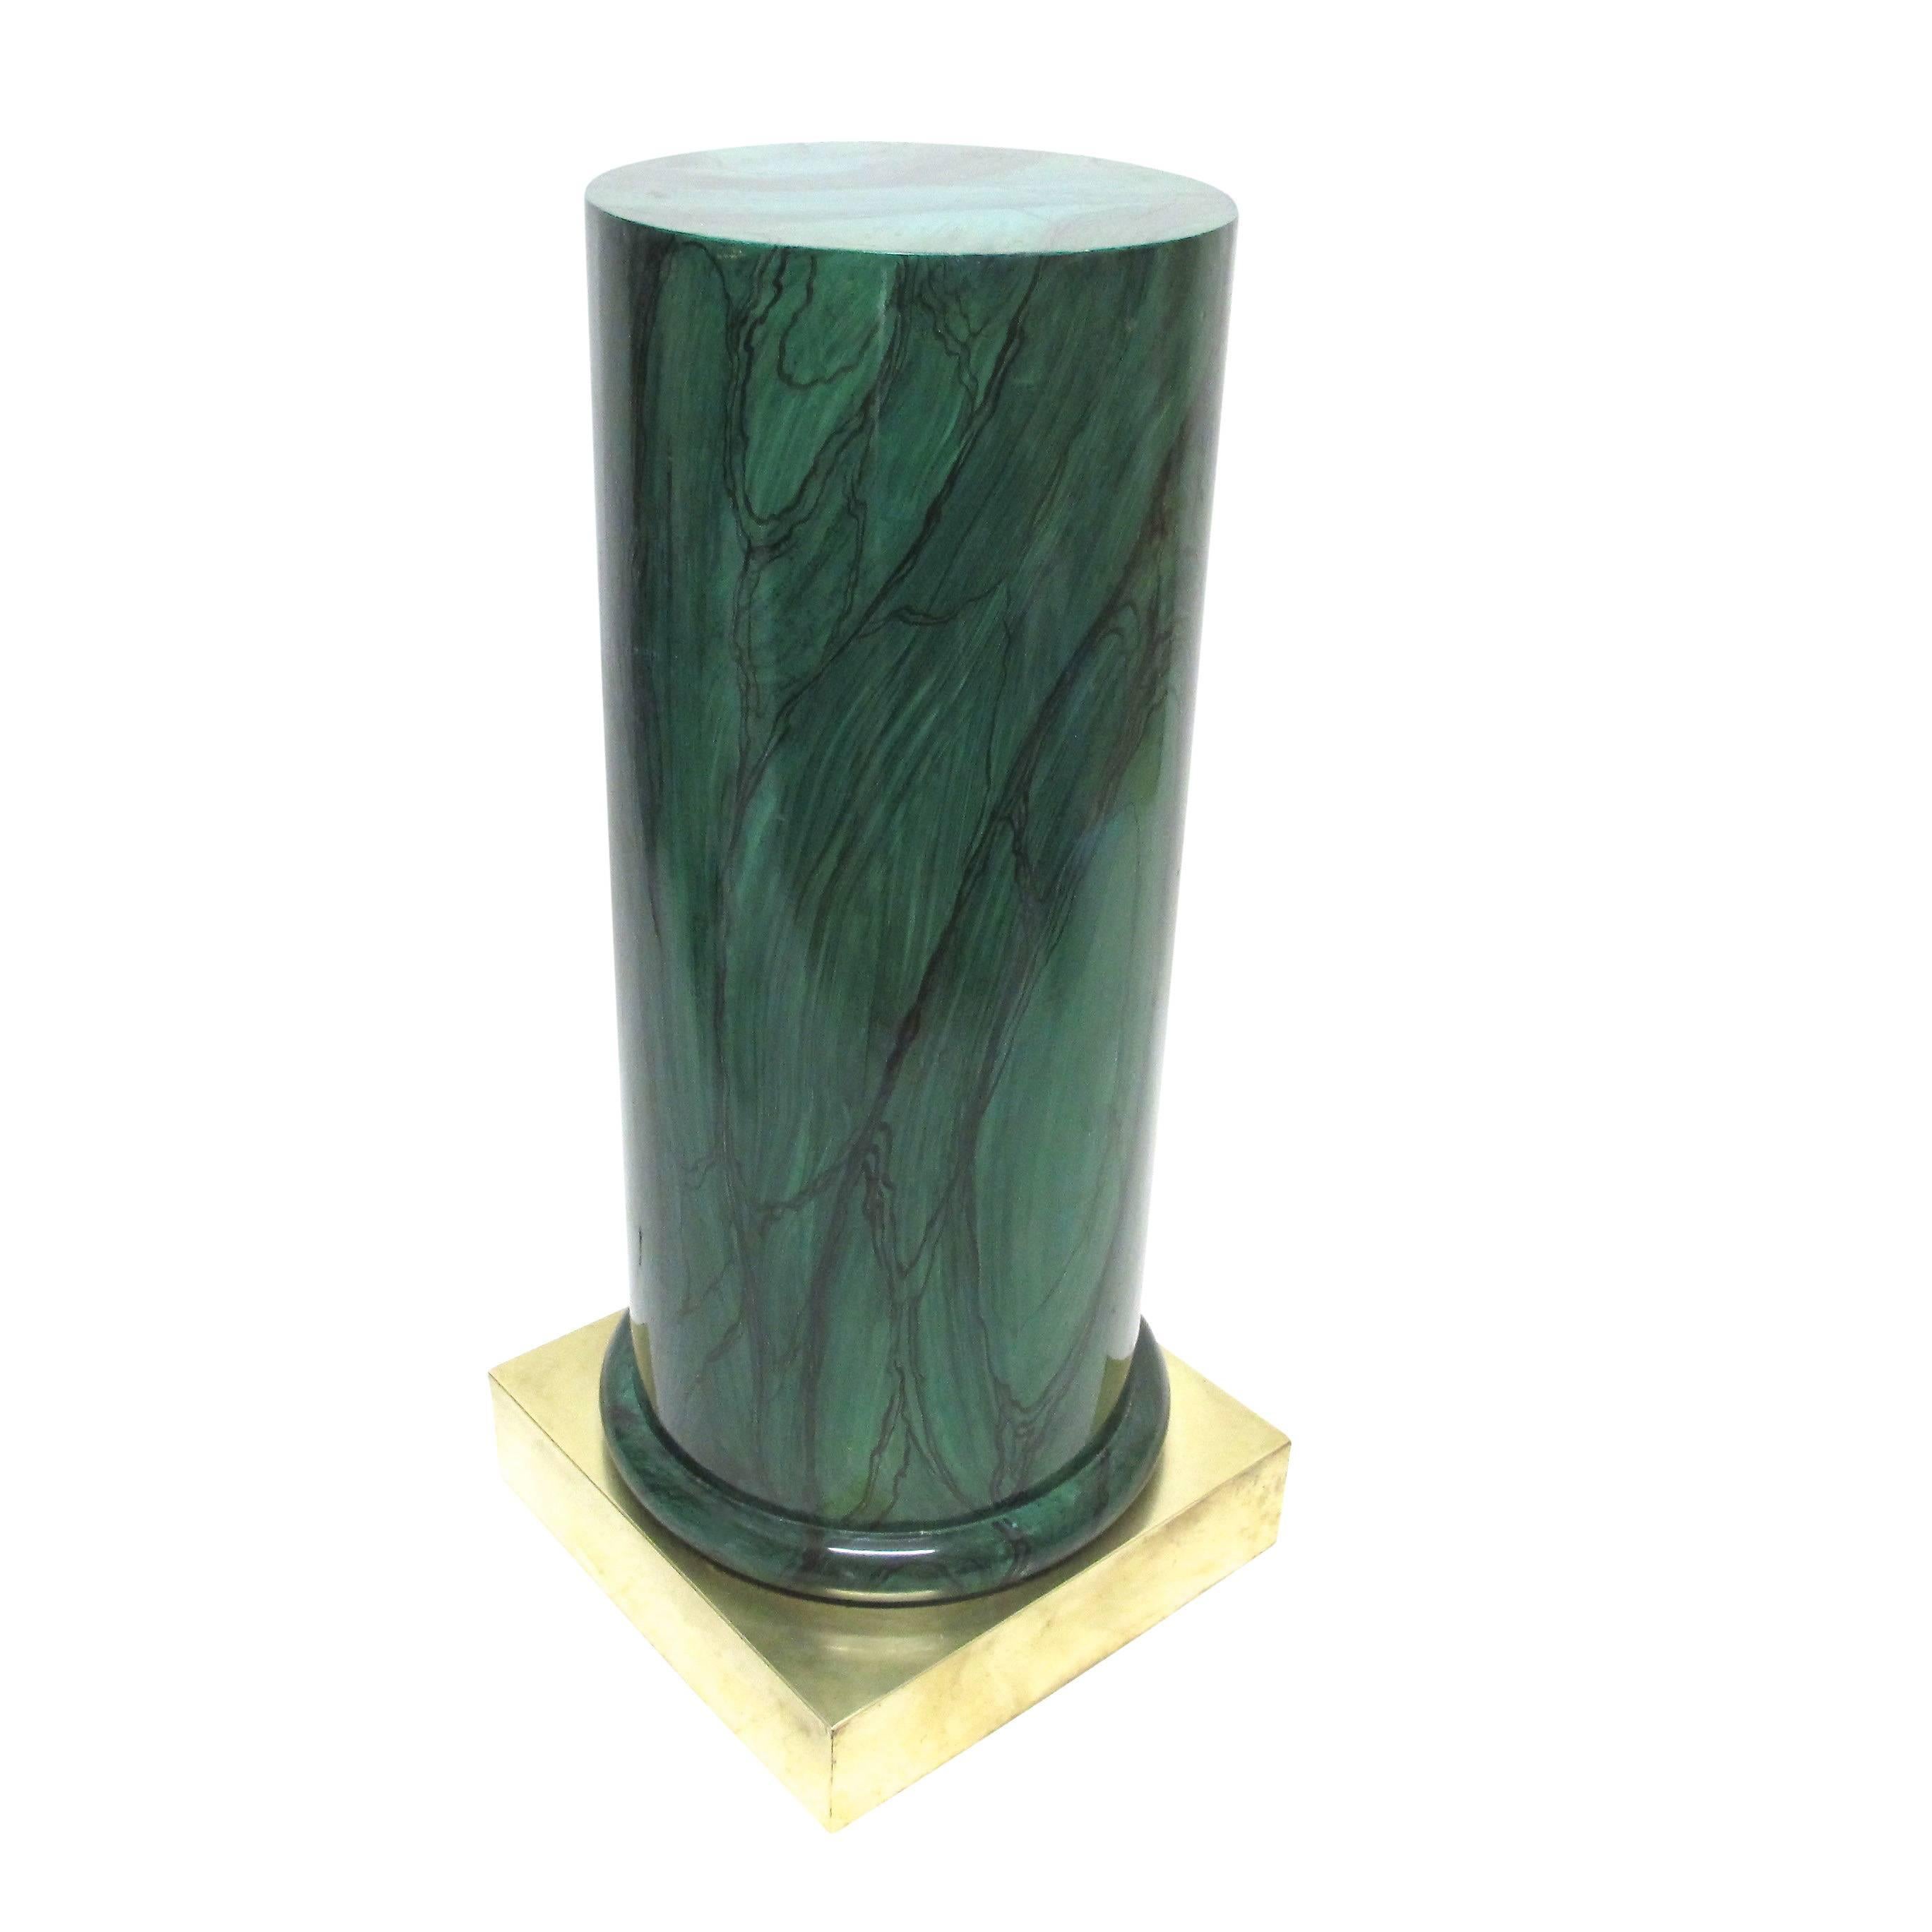 A round pedestal with hand-painted malachite decoration and having a square brass base. American, second half of 20th century.